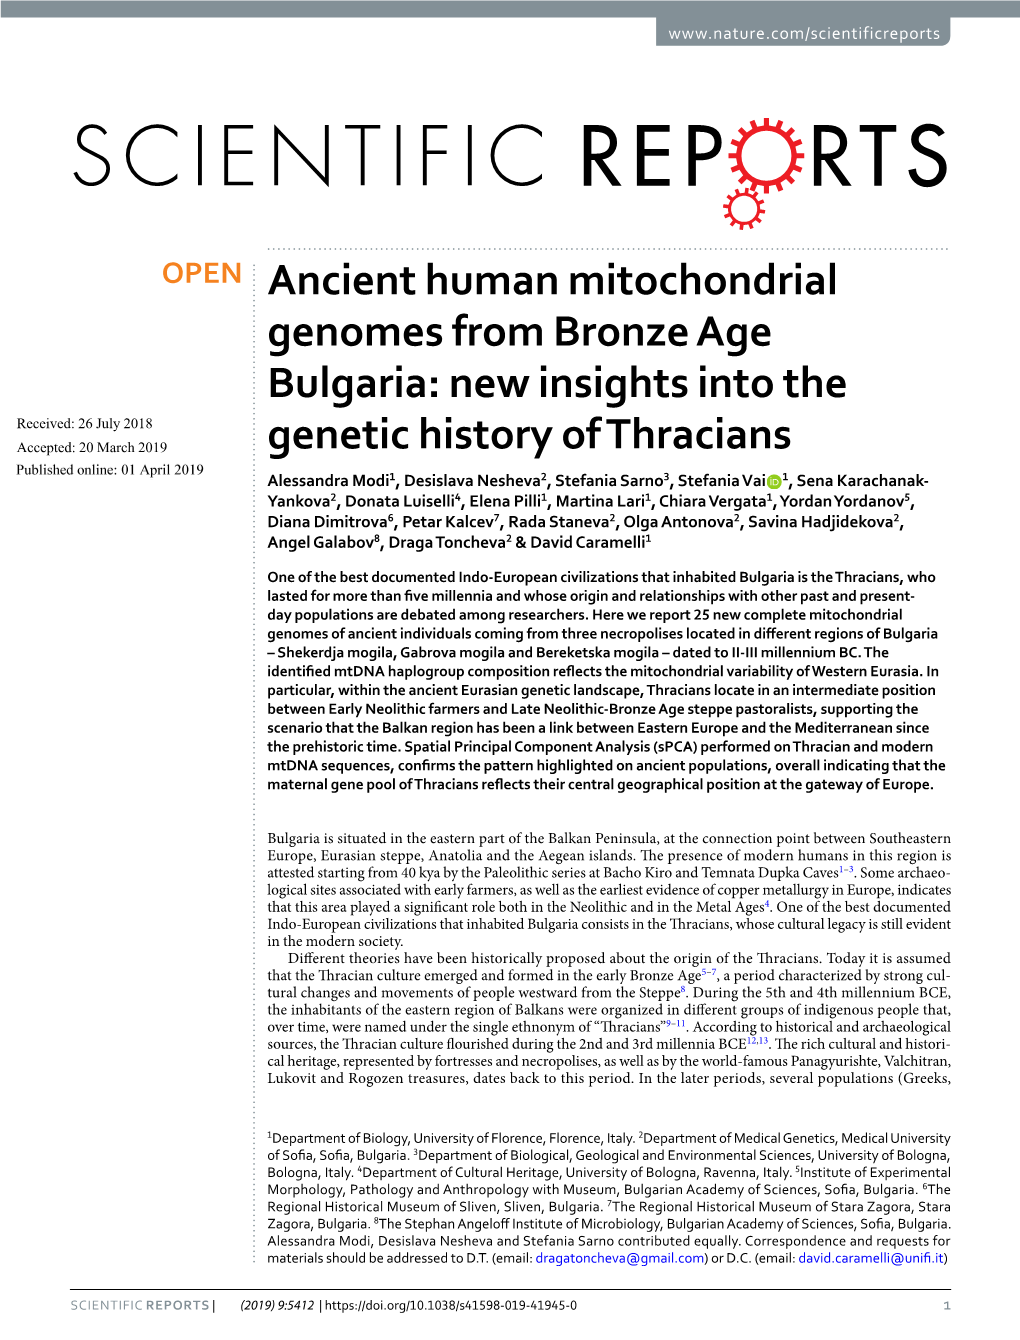 Ancient Human Mitochondrial Genomes from Bronze Age